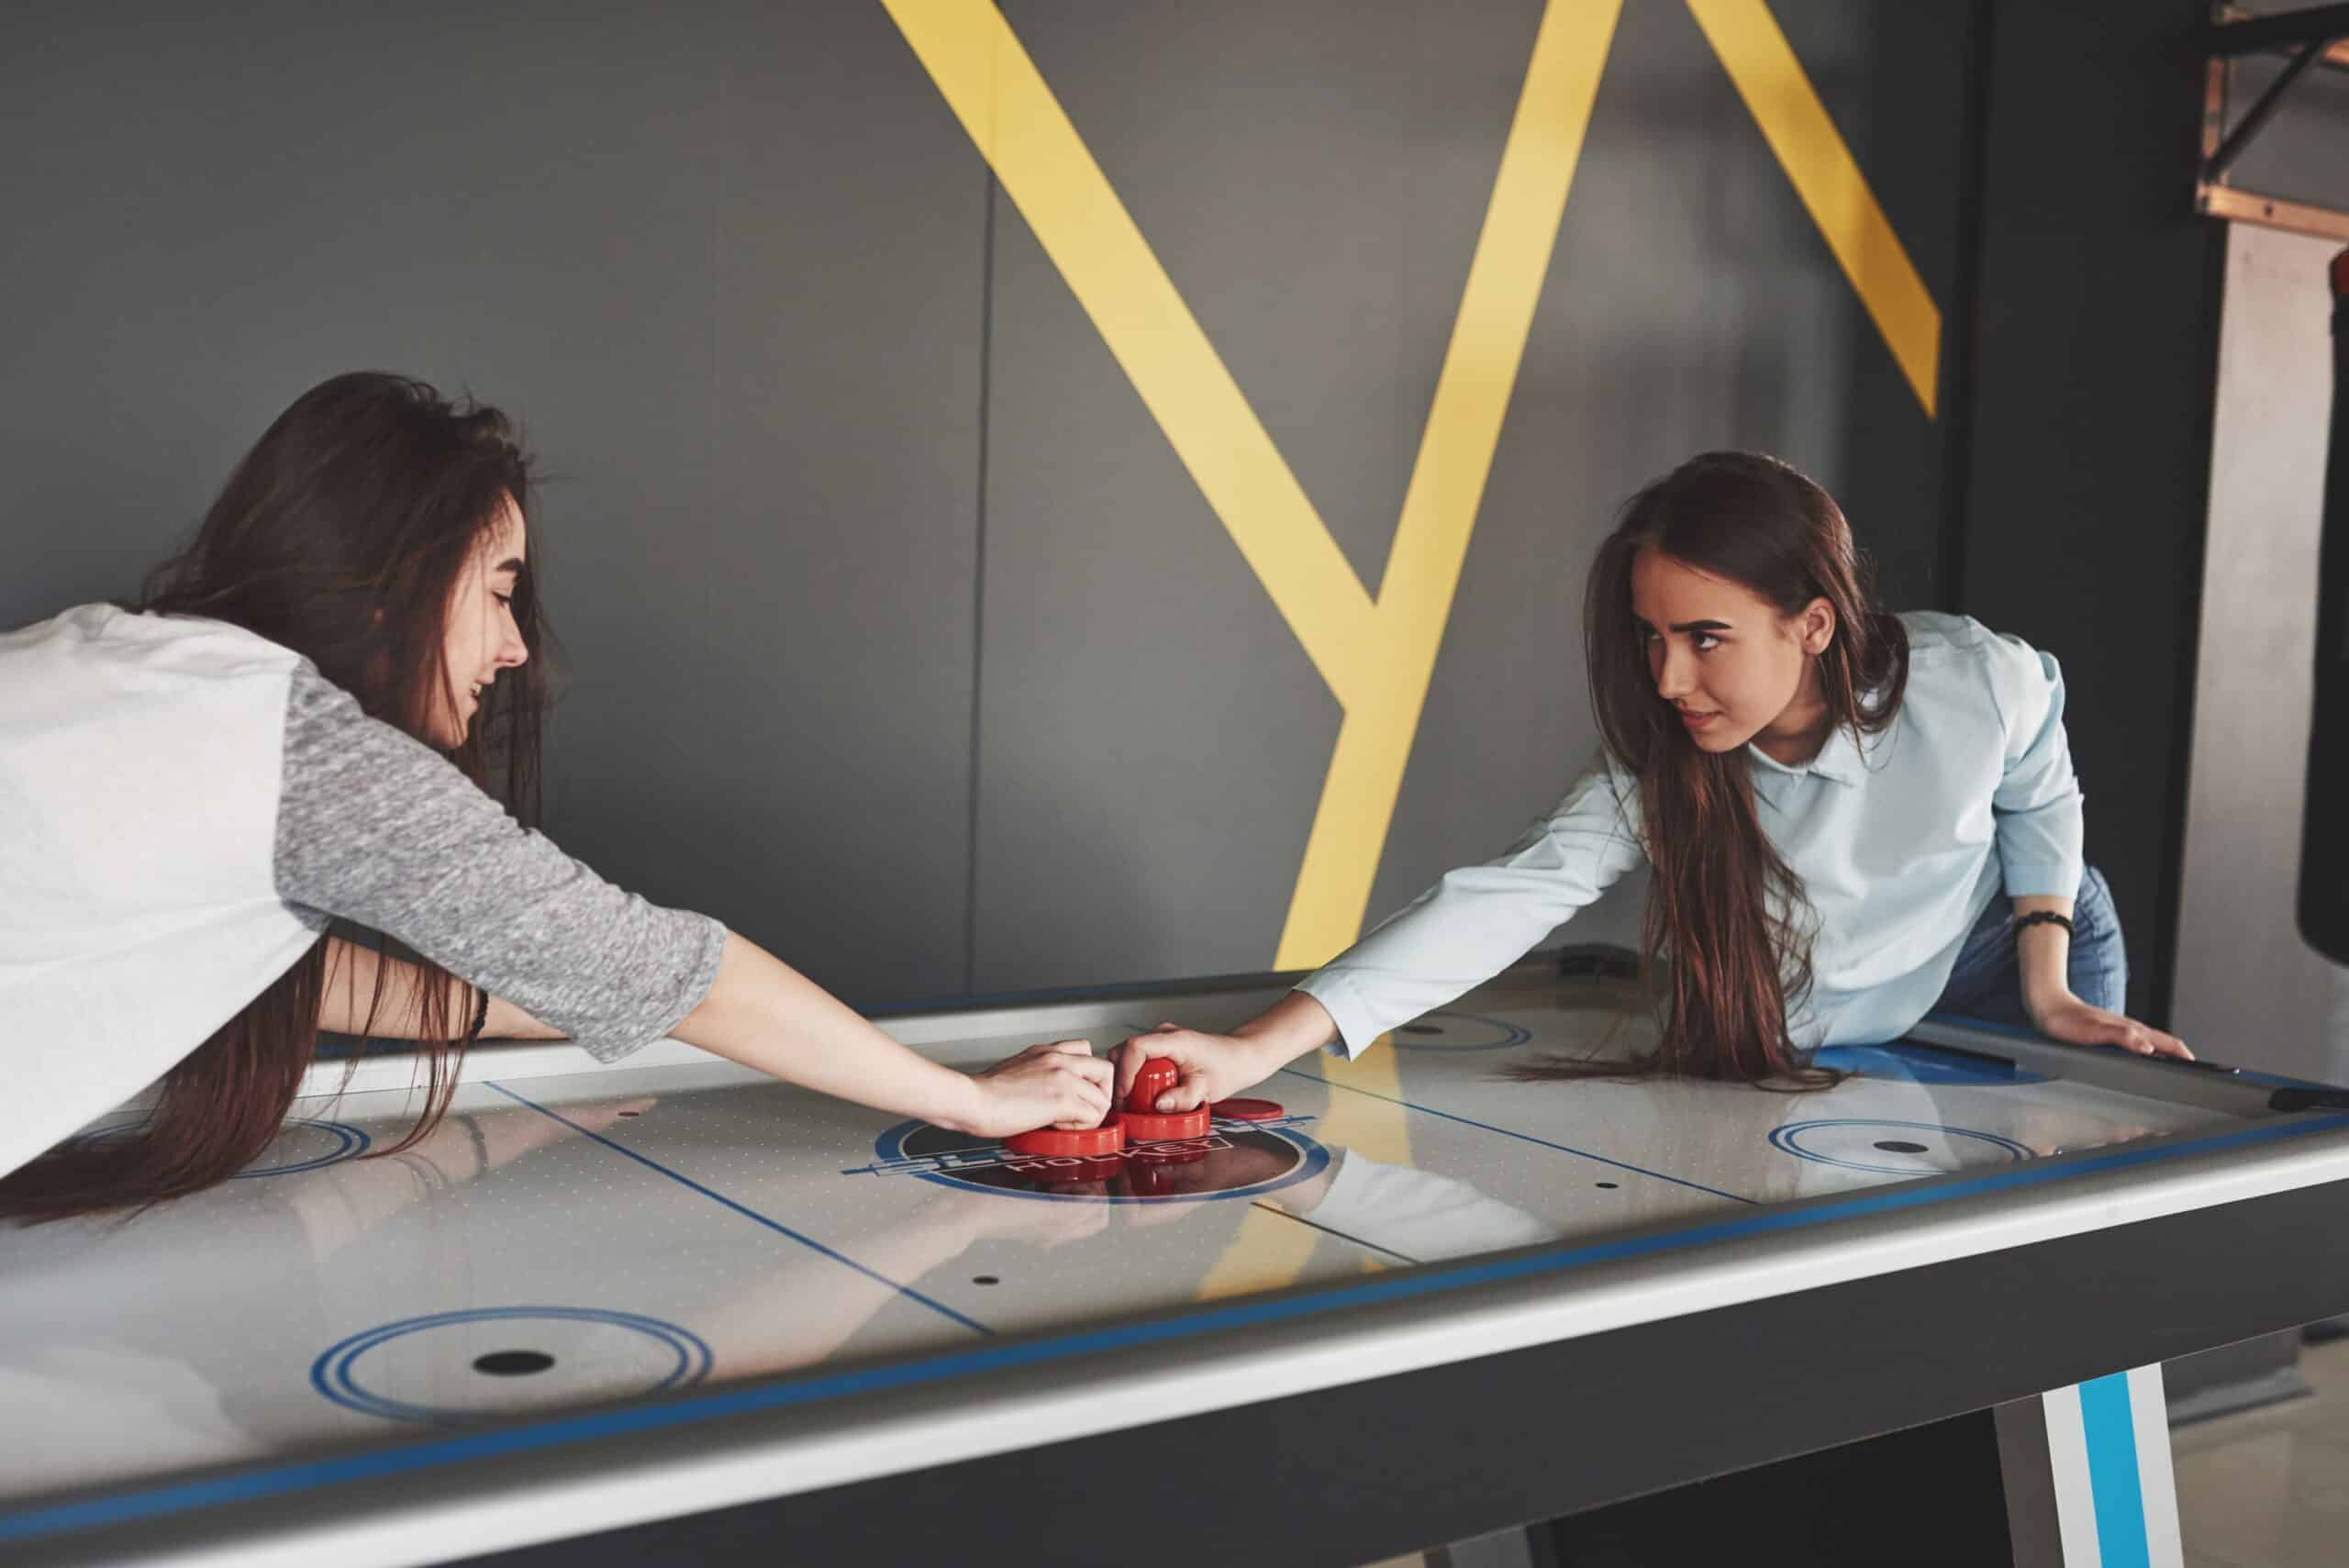 two-beautiful-twin-girls-play-air-hockey-game-roomand-have-fun-1